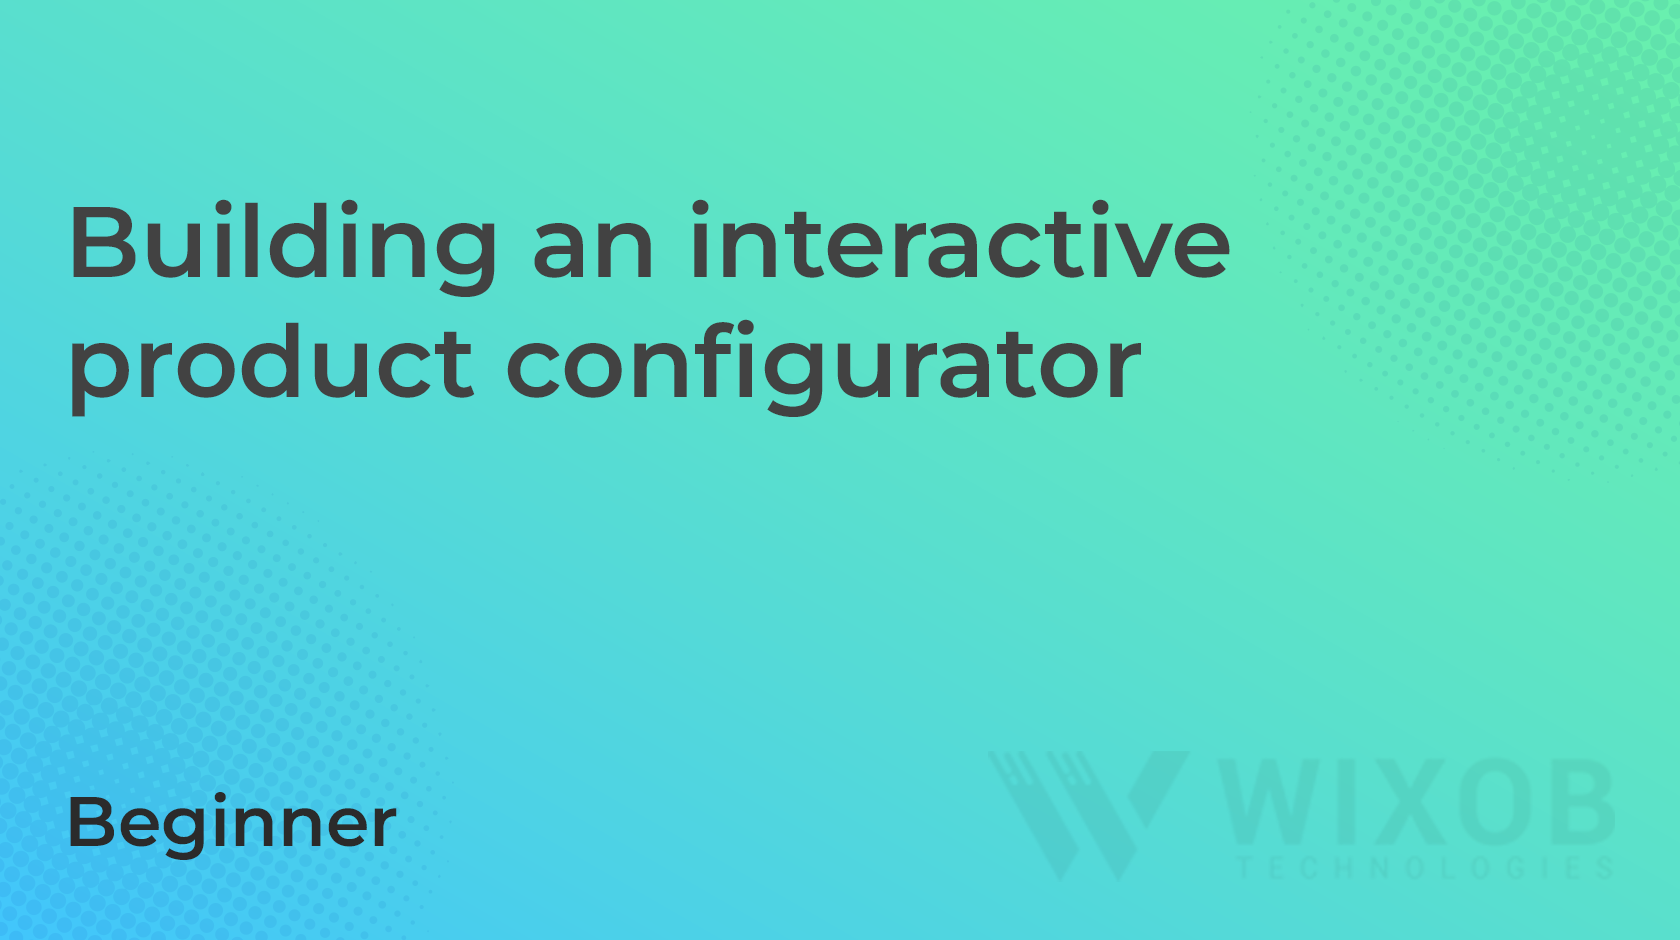 Building an interactive product configurator